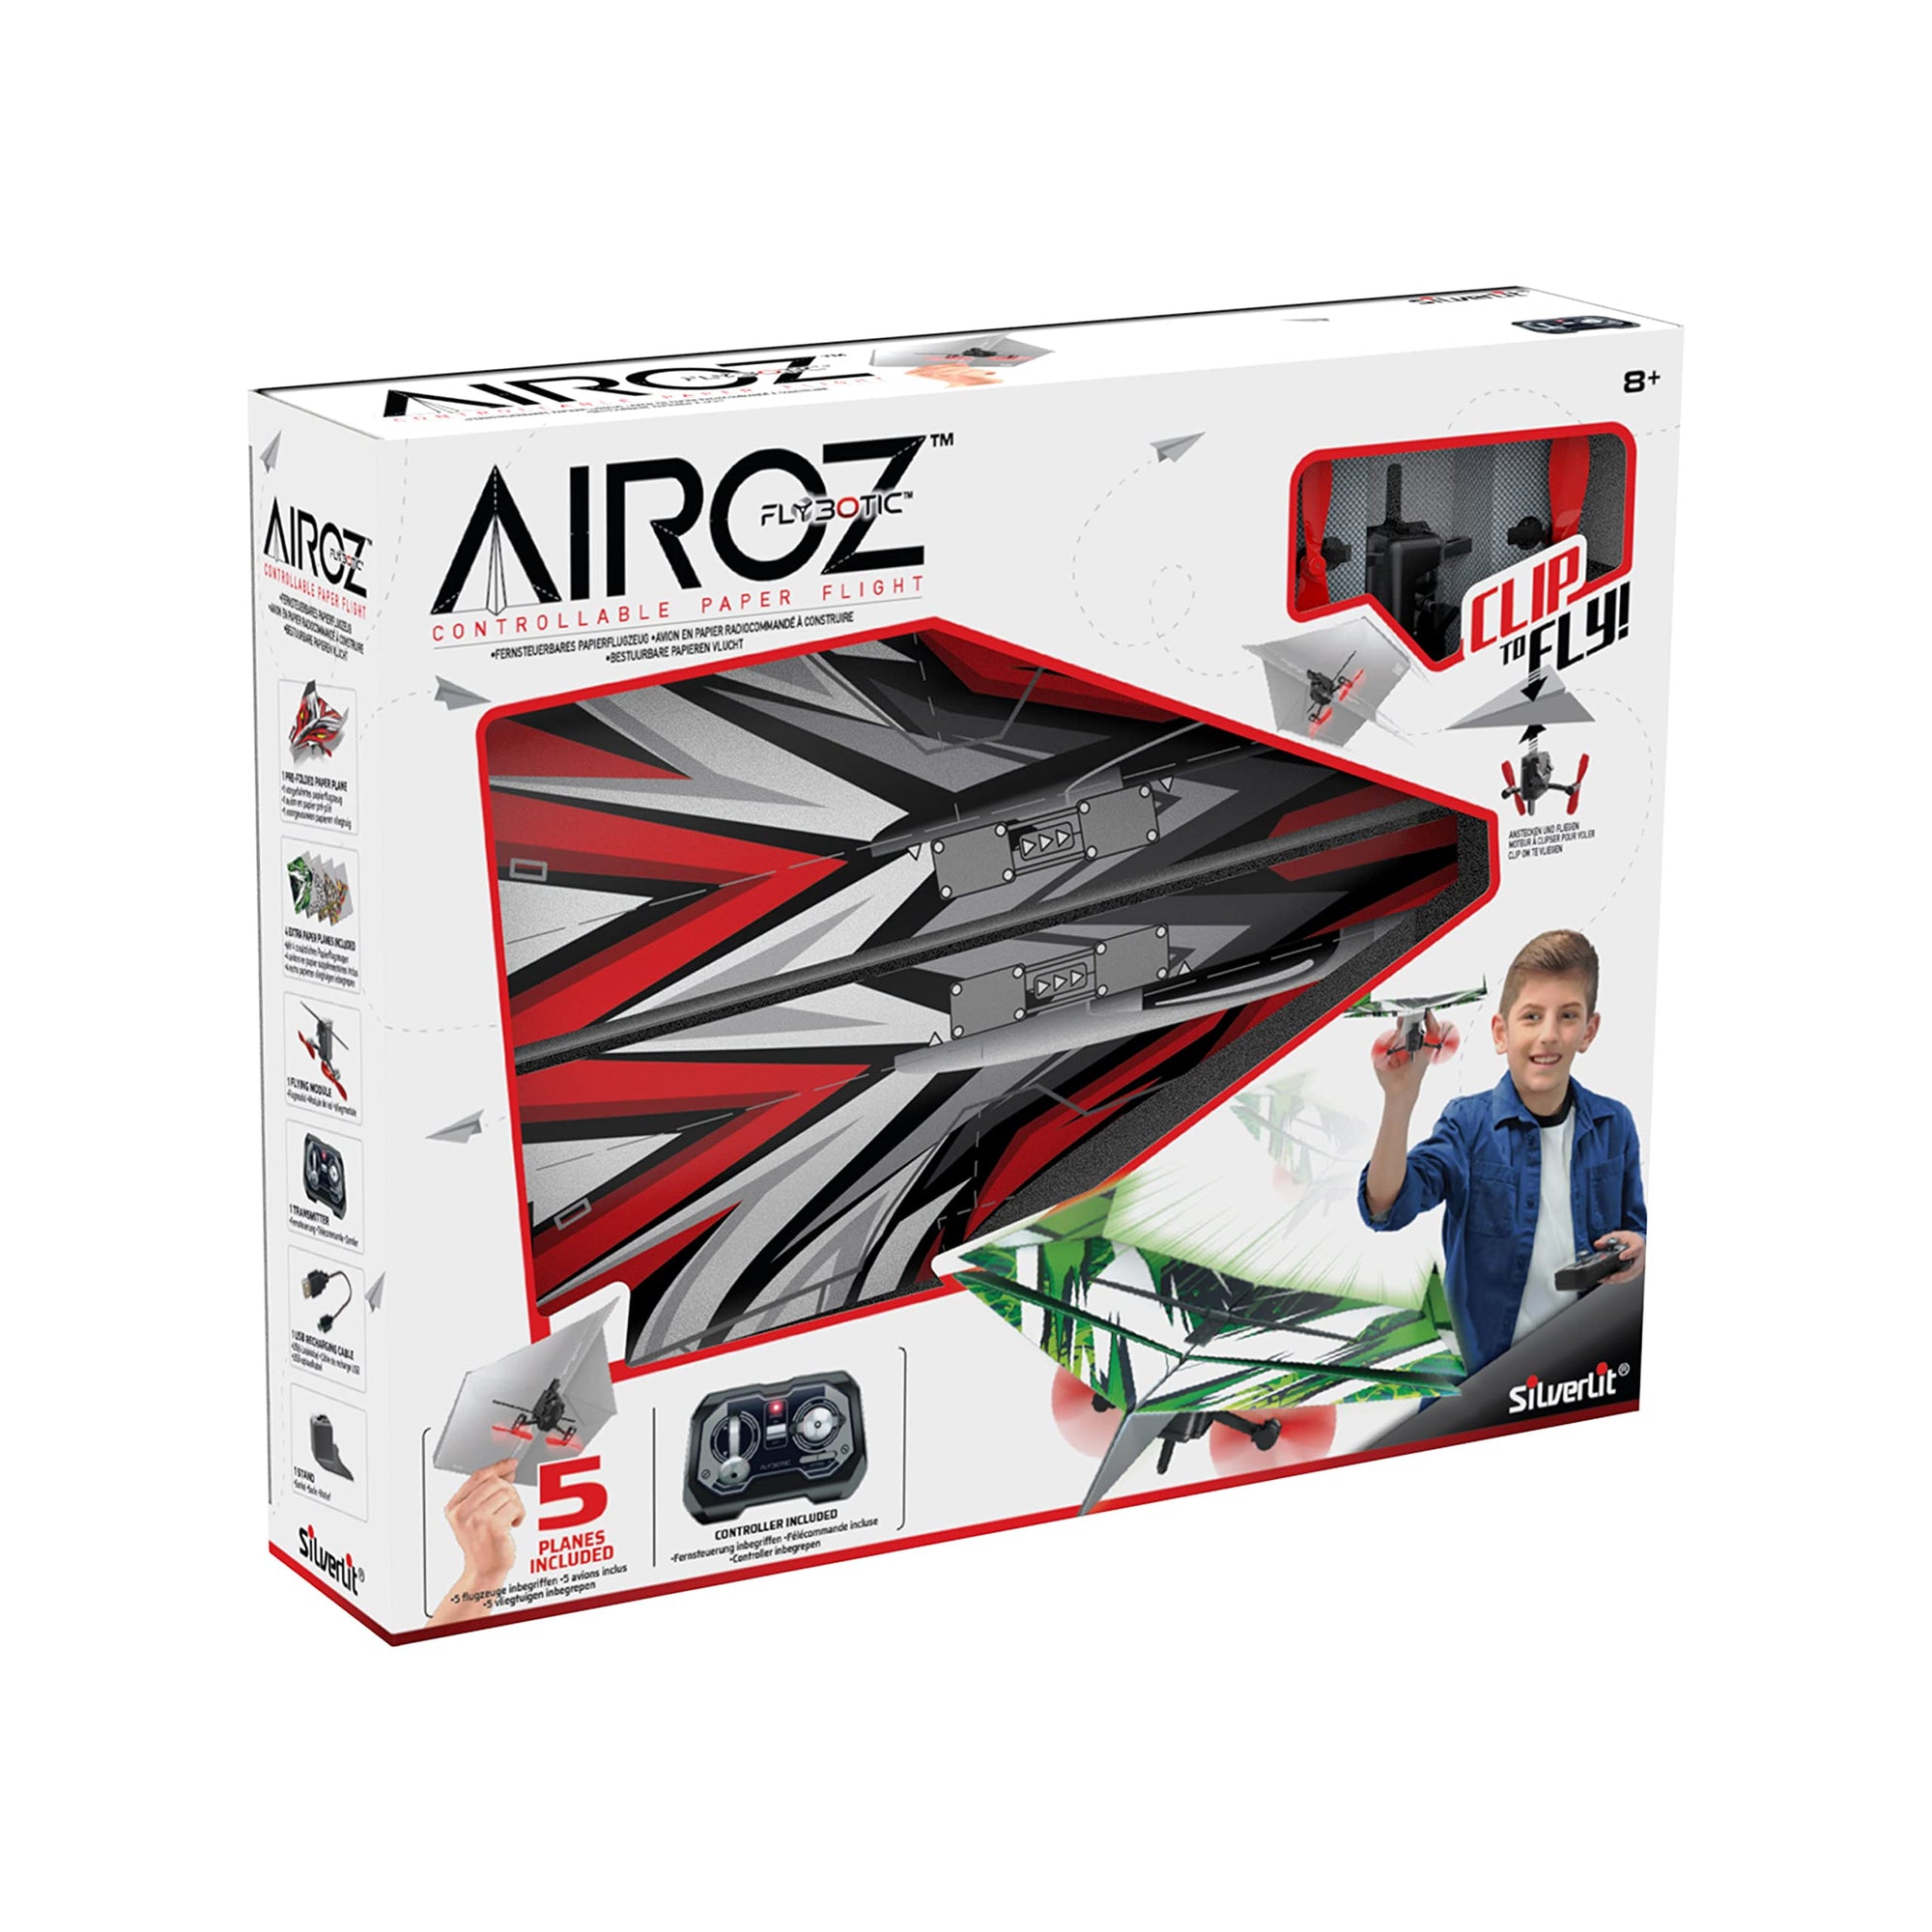 Flybotic Airoz RC Paper Planereq 3 x AAA batteries